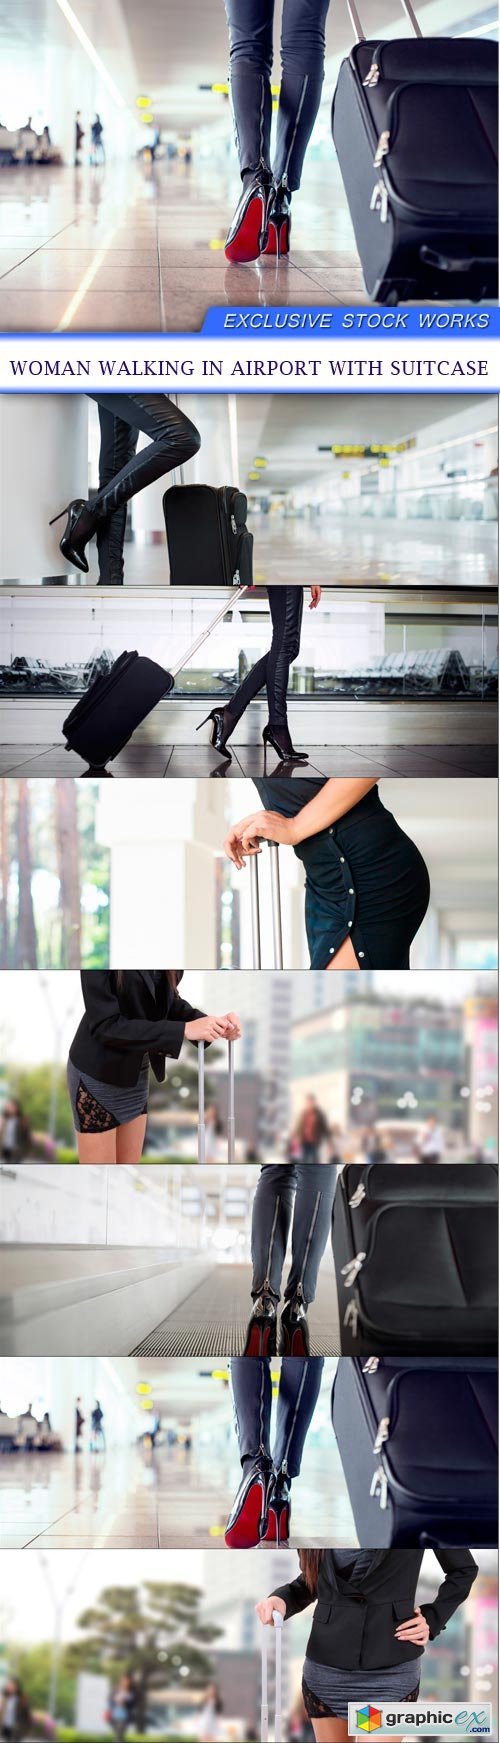 Woman walking in airport with suitcase 7x JPEG